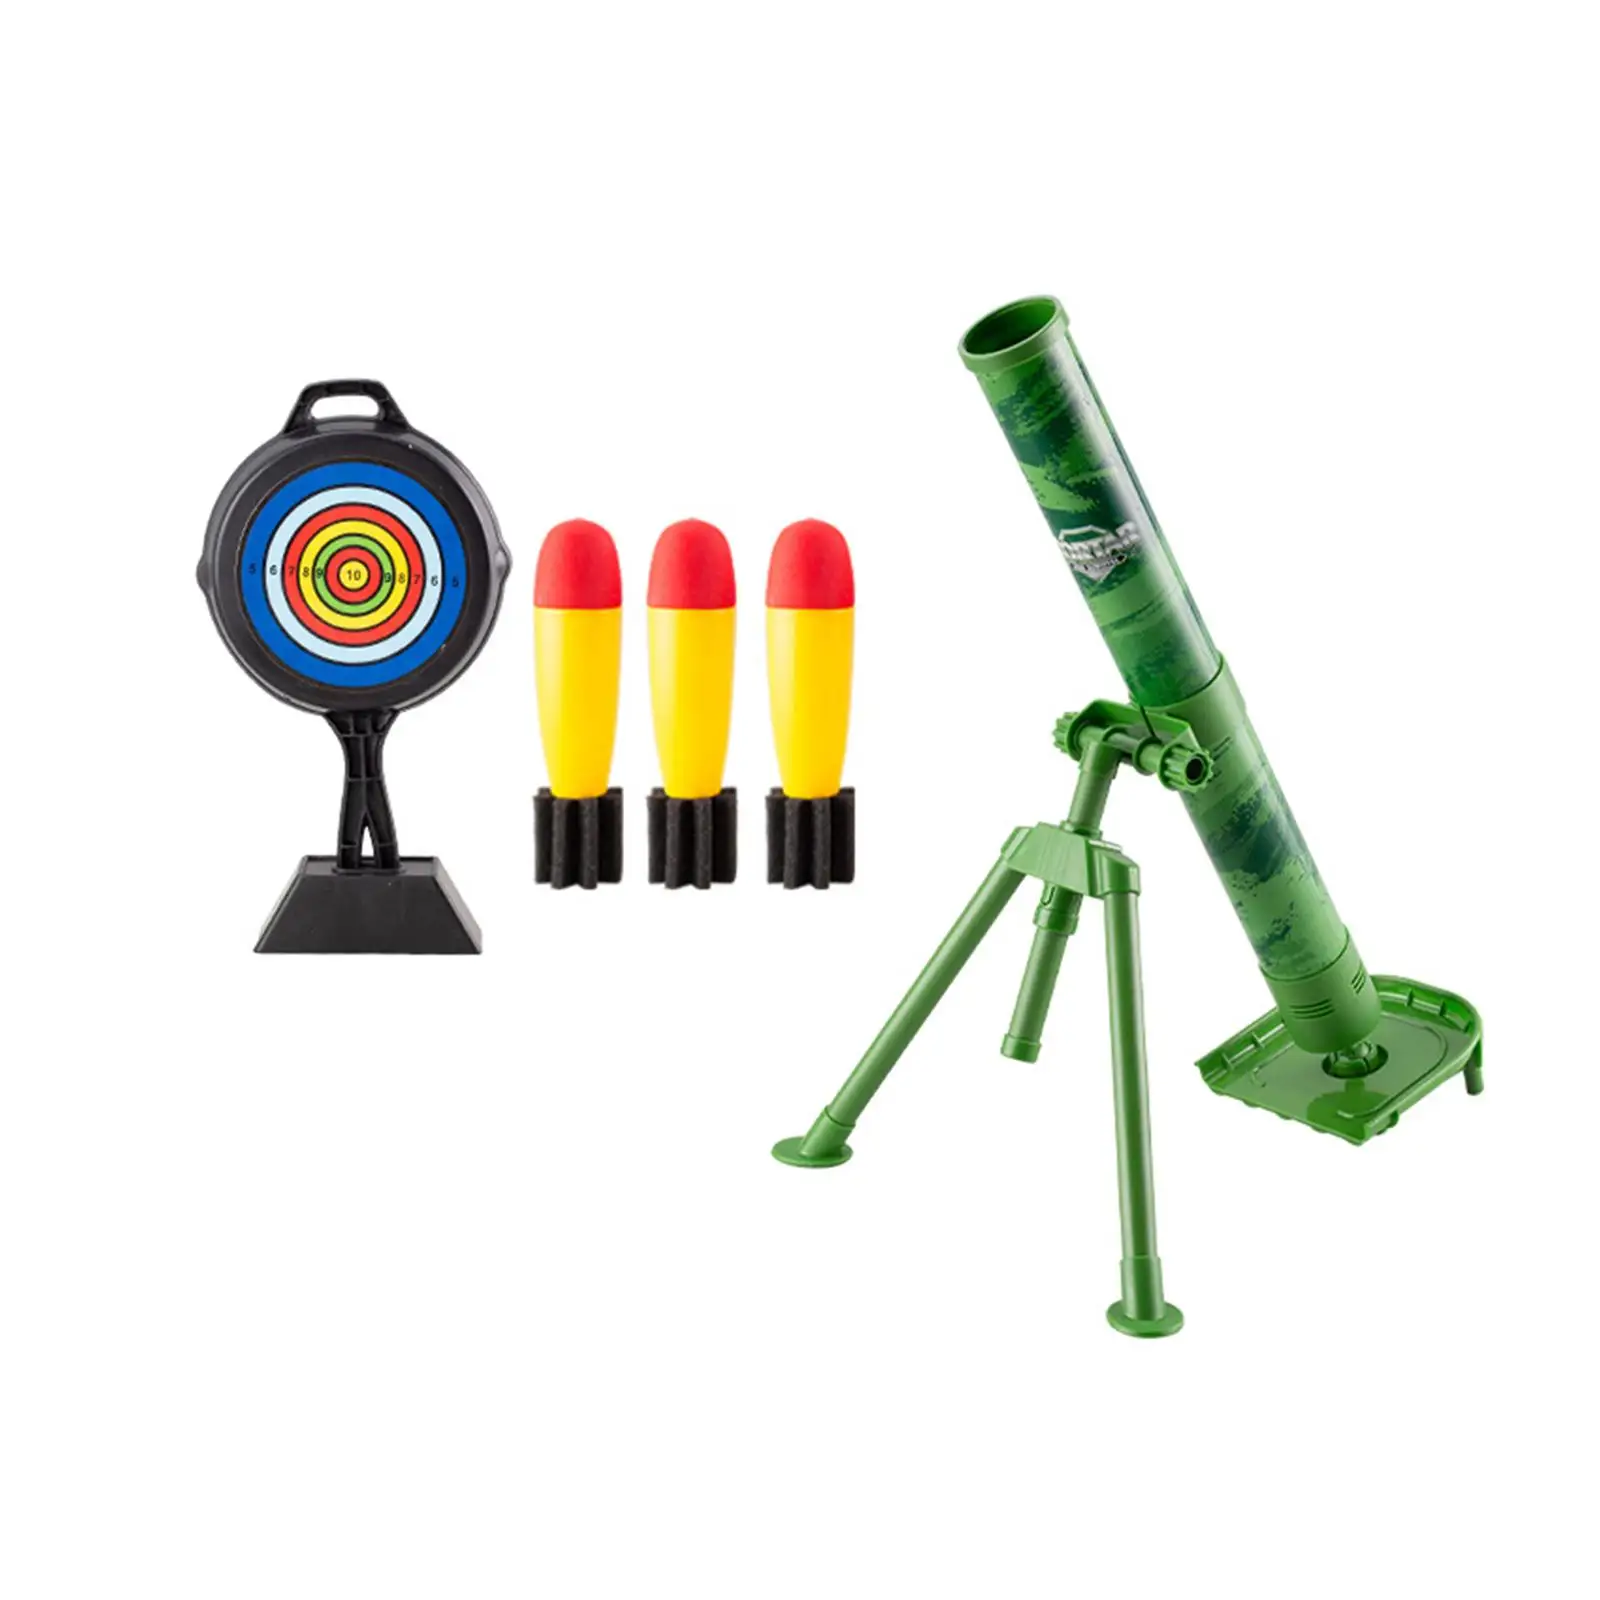 Mortar Launcher Toy Set Interactive Games with 3 Safety Foam Shells Play Game Kits Launch Set Chase Rocket Birthday Present